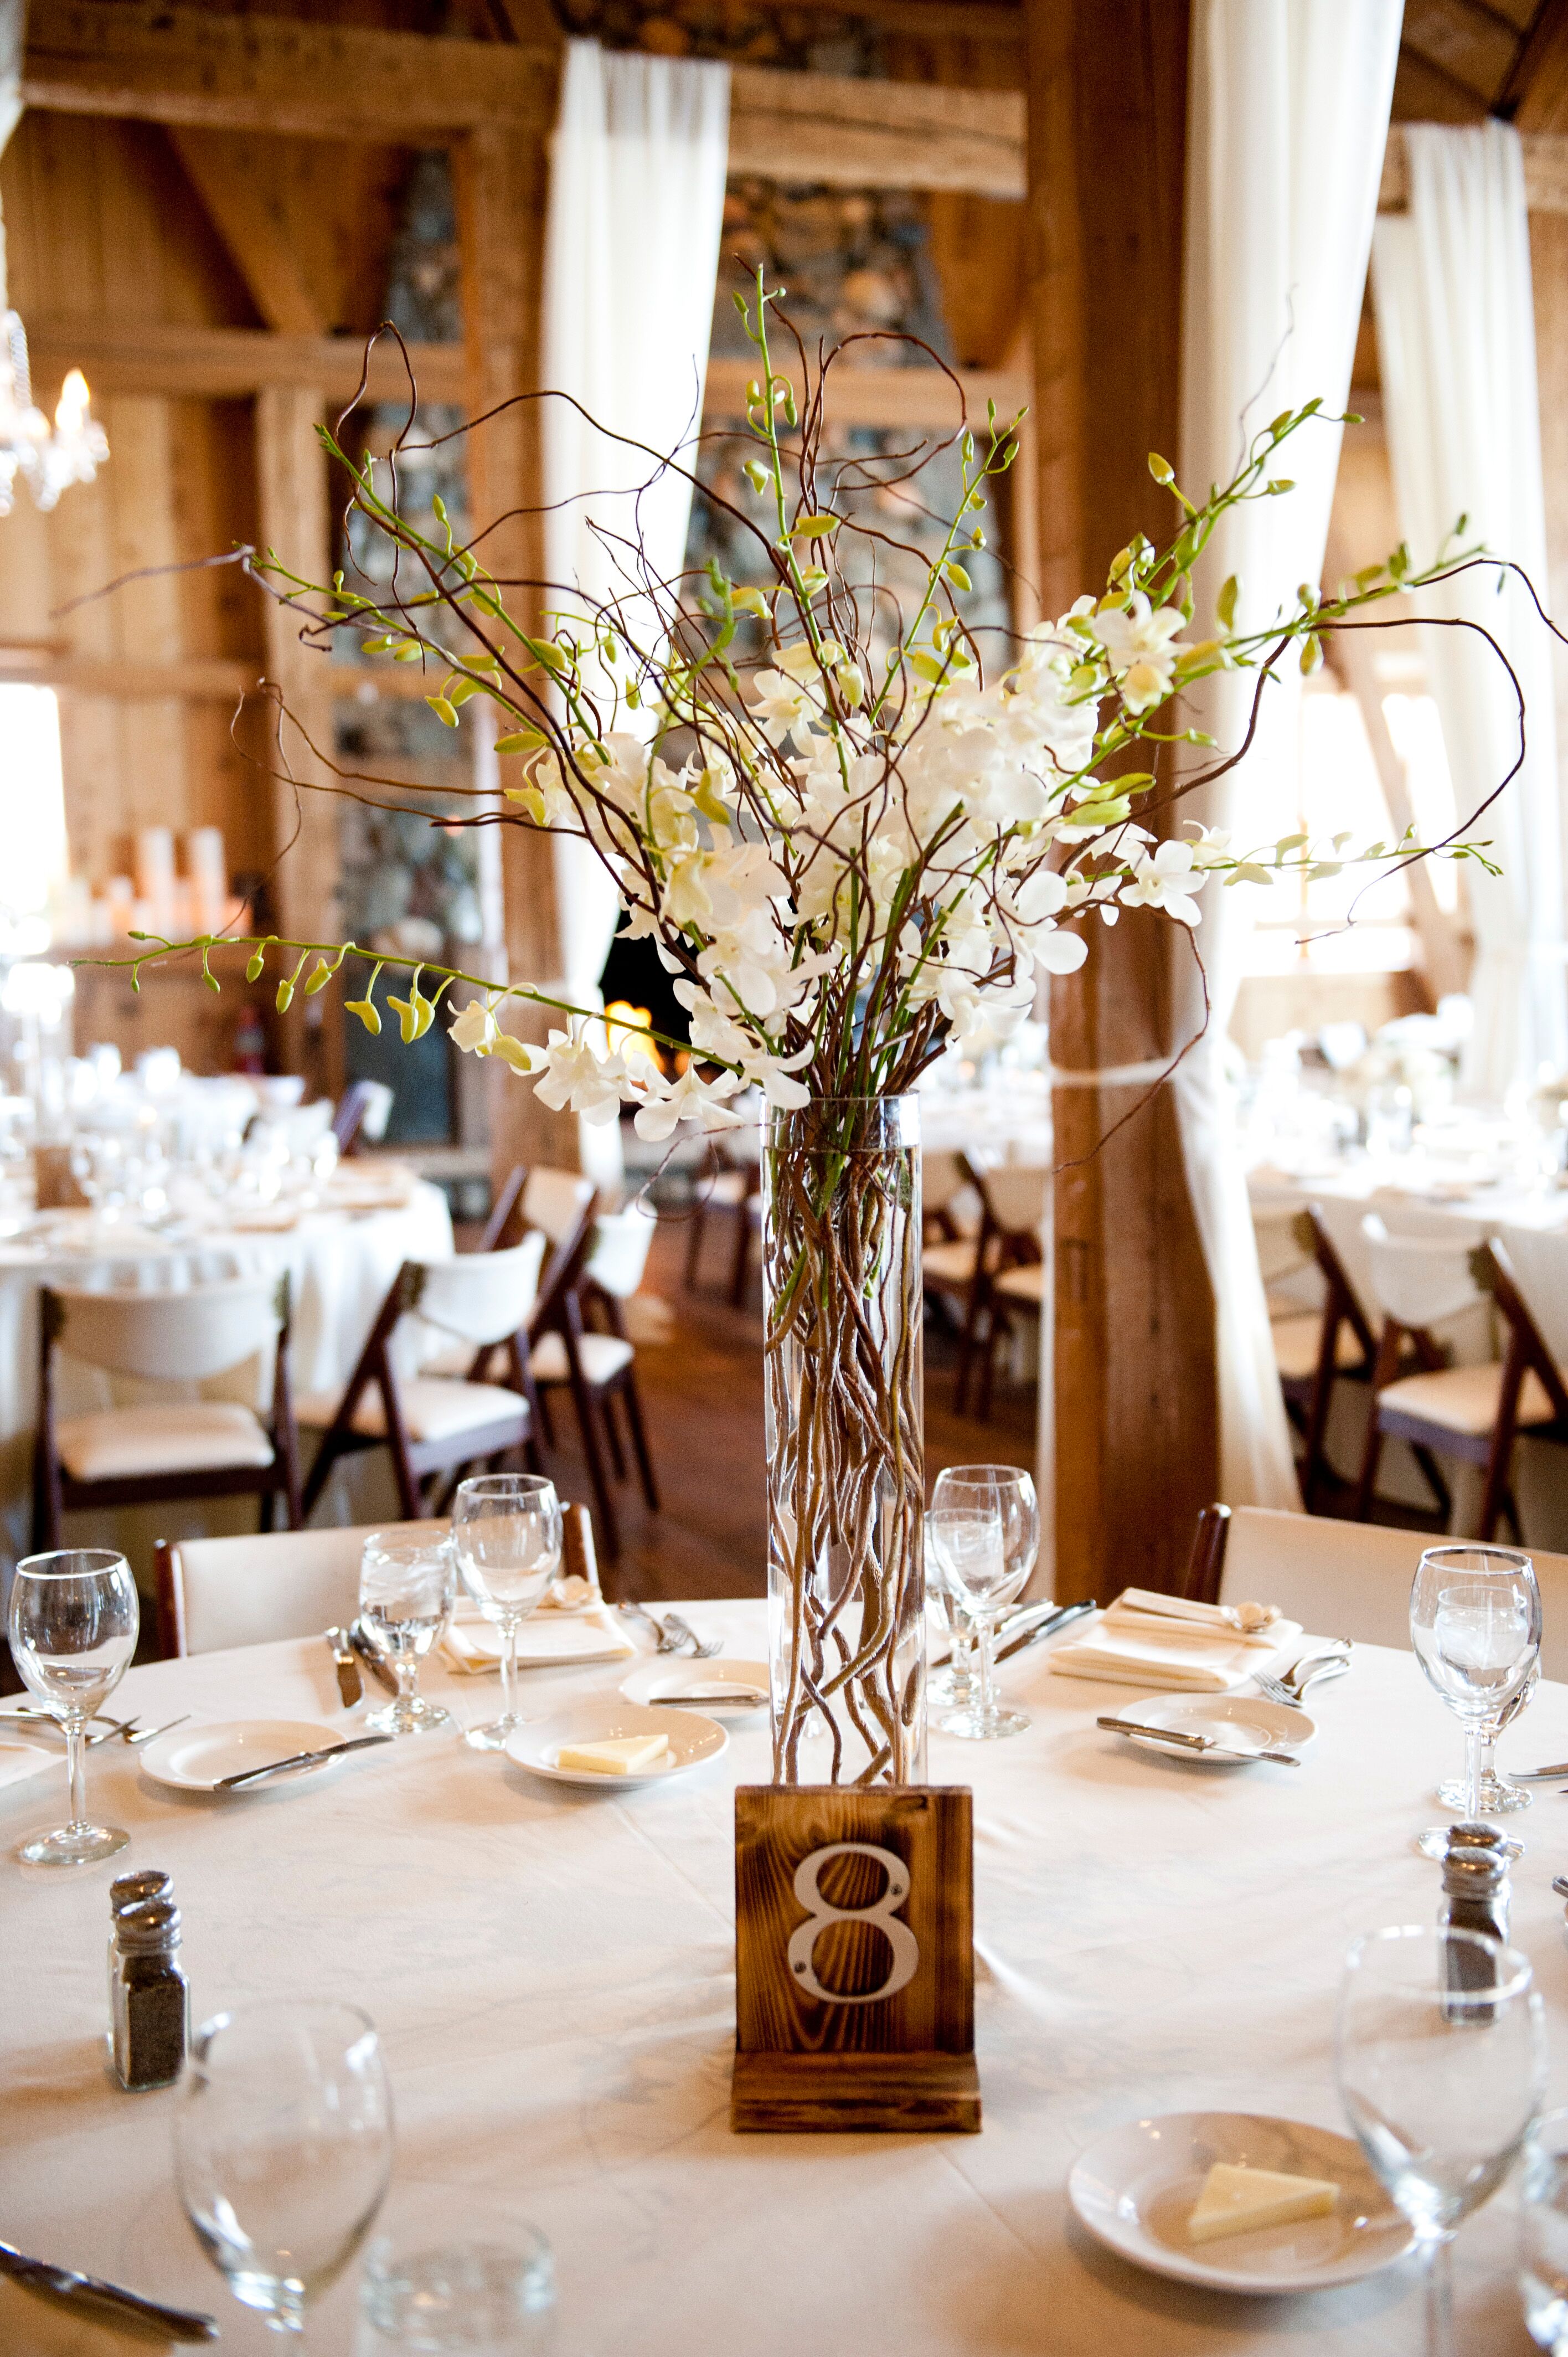 A Trend We're Loving: Twig and Branch Wedding Décor